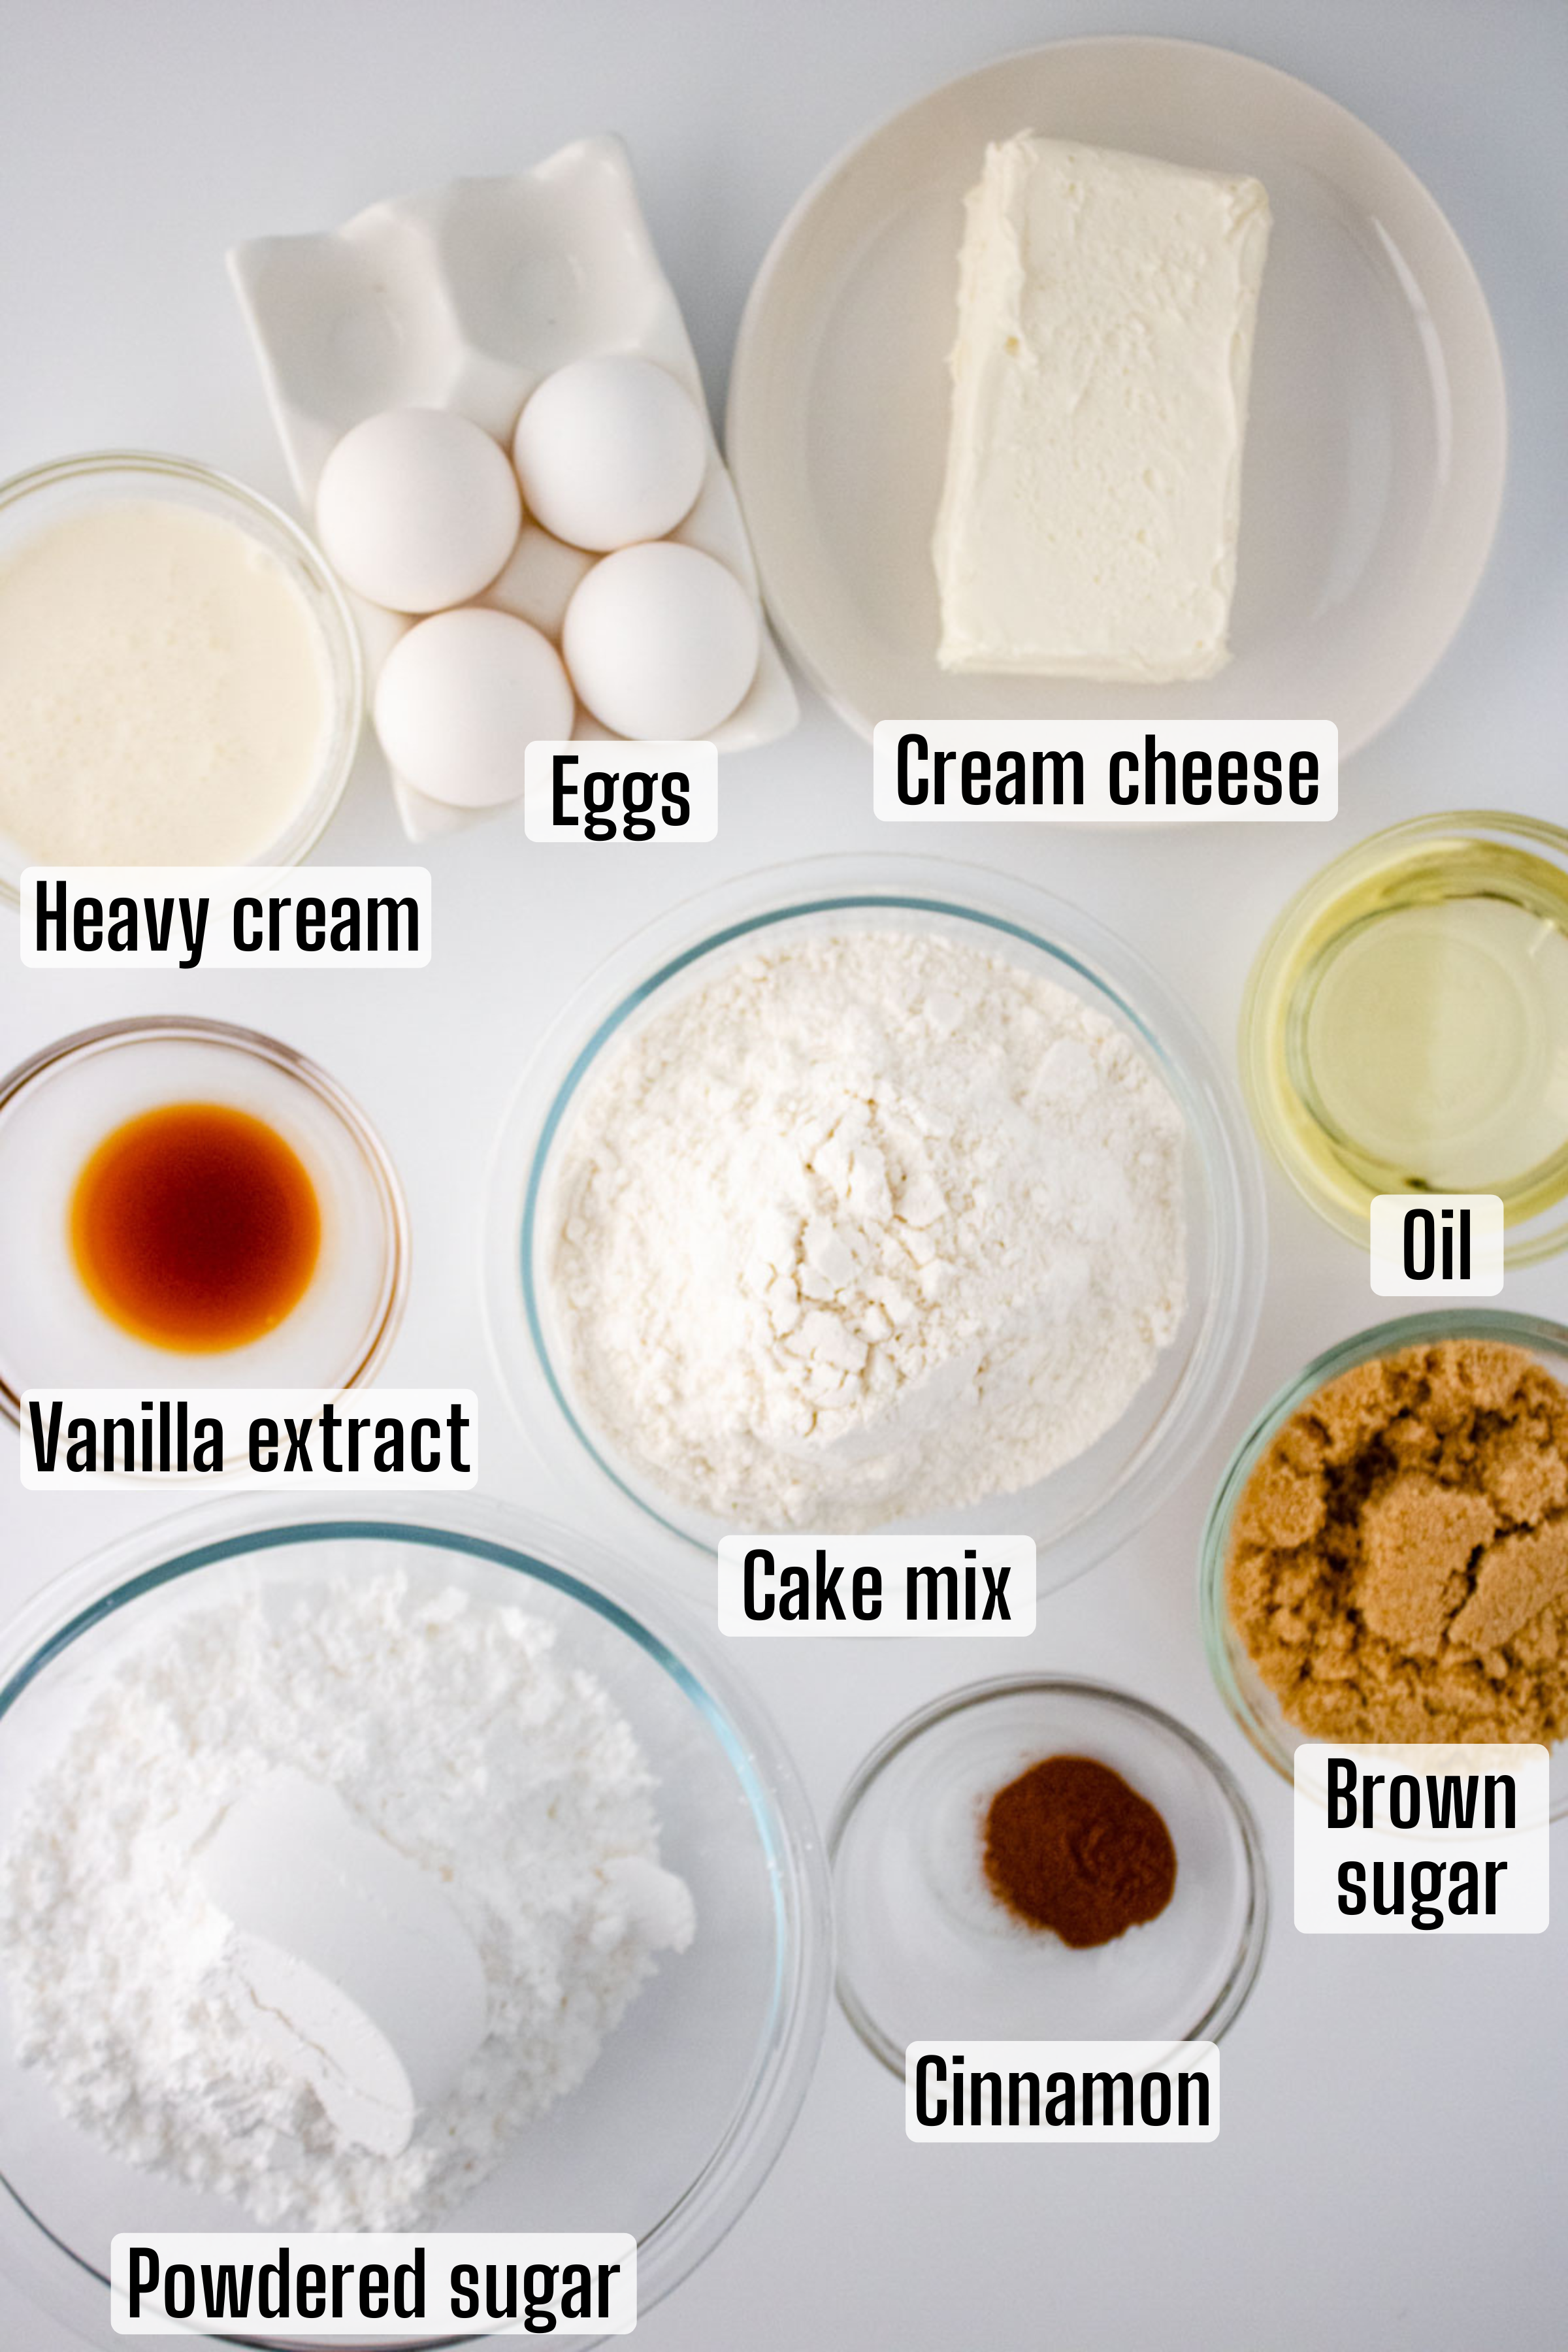 Various labeled ingredients for a honey bun cake recipe, including eggs, cream cheese, heavy cream, oils, and spices, are arranged neatly on a white surface.